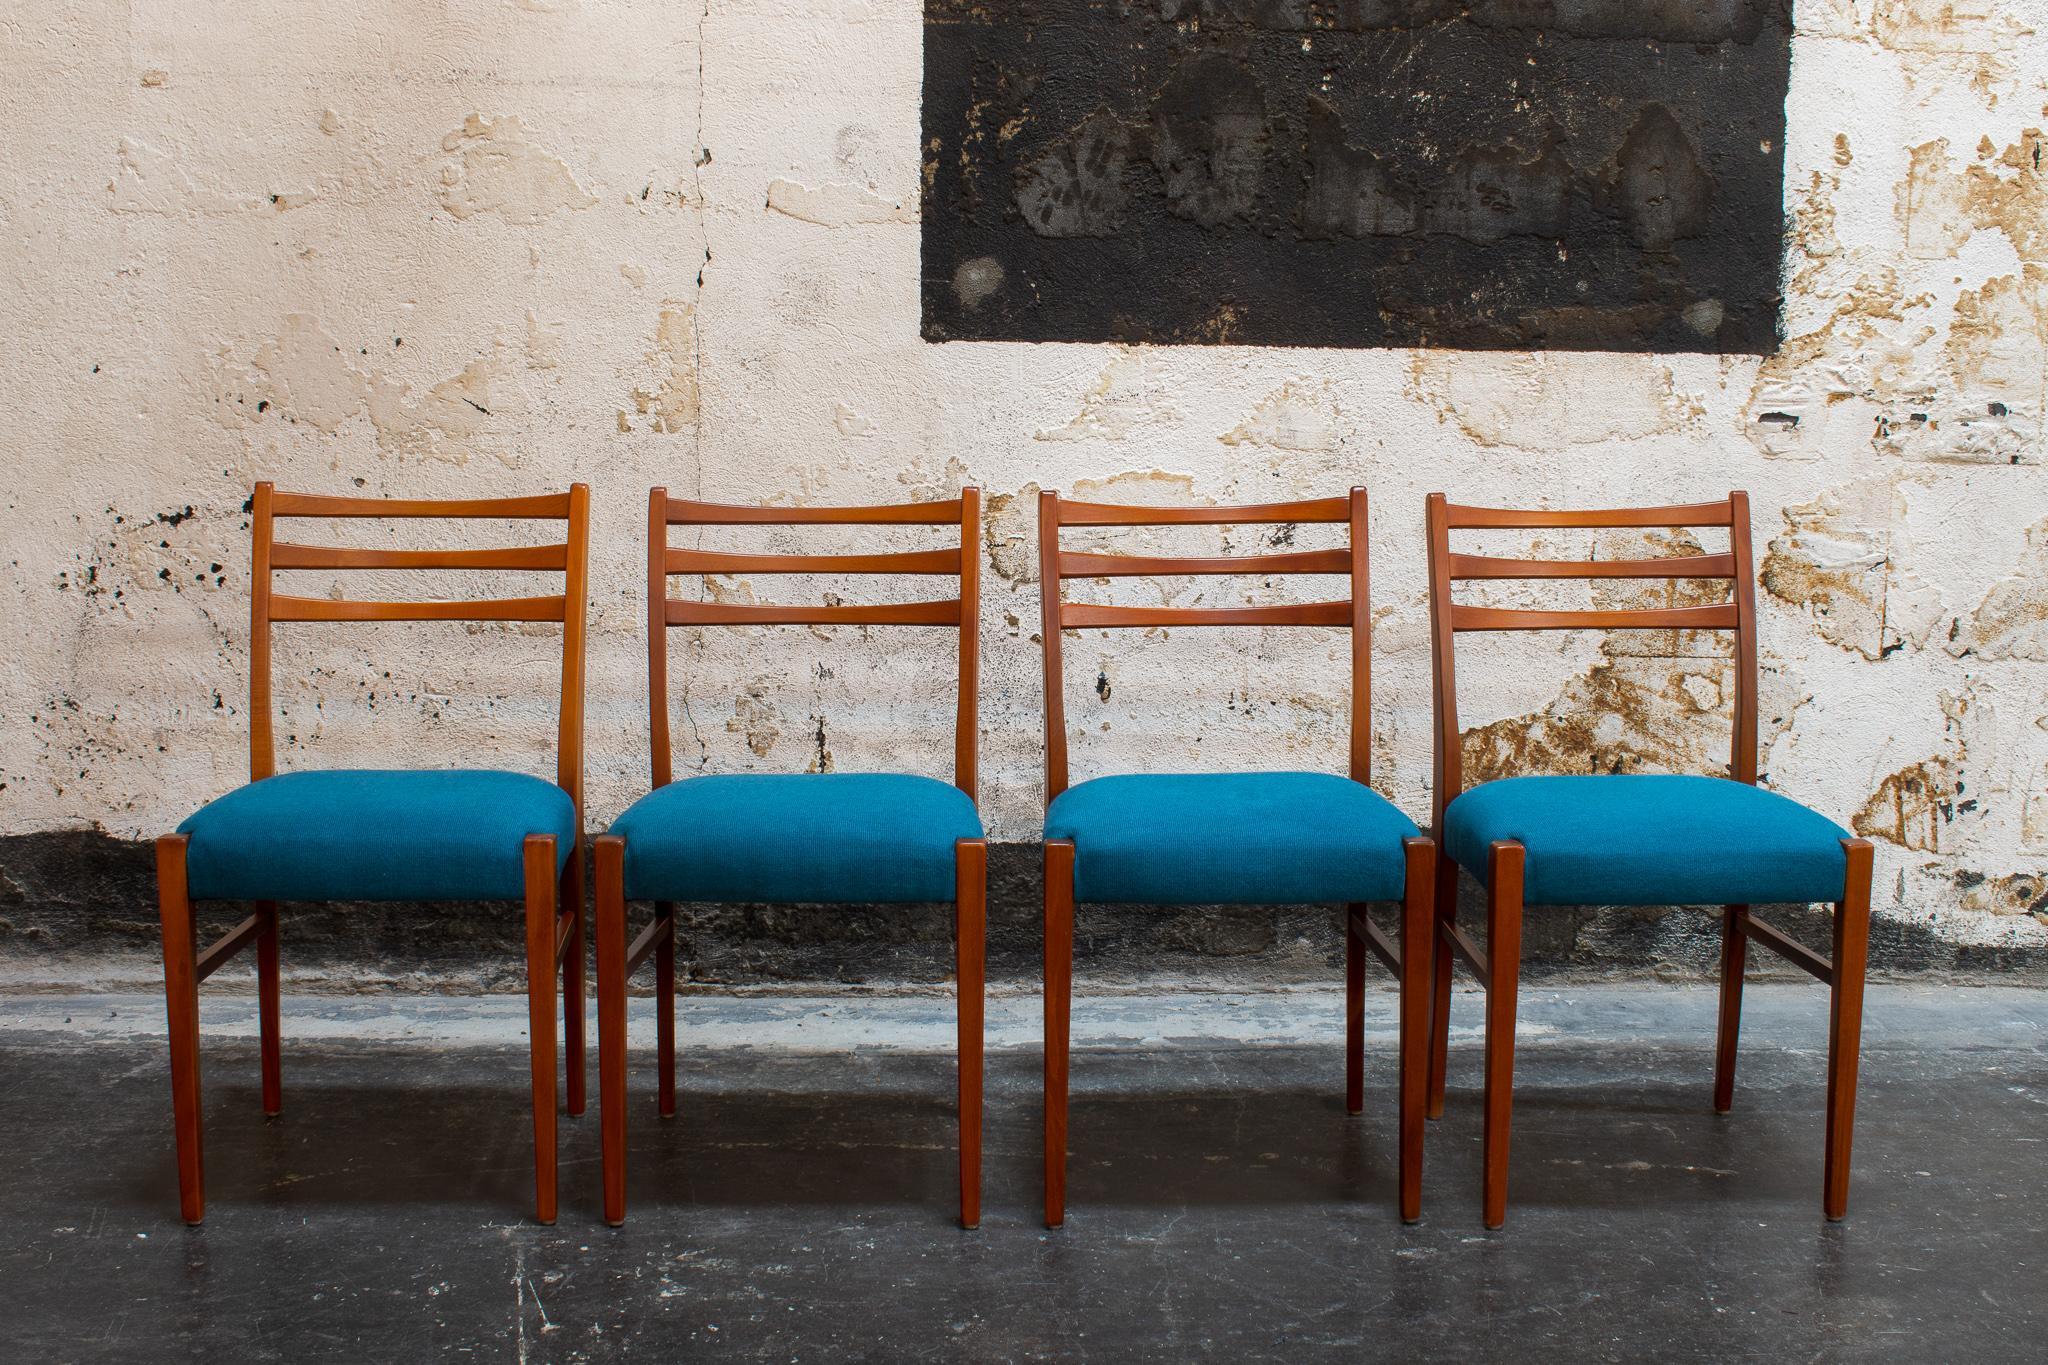 Set of four newly restored teak dining chairs from Sweden, c. 1960. Upholstered in blue ribbed fabric and ready for immediate delivery.